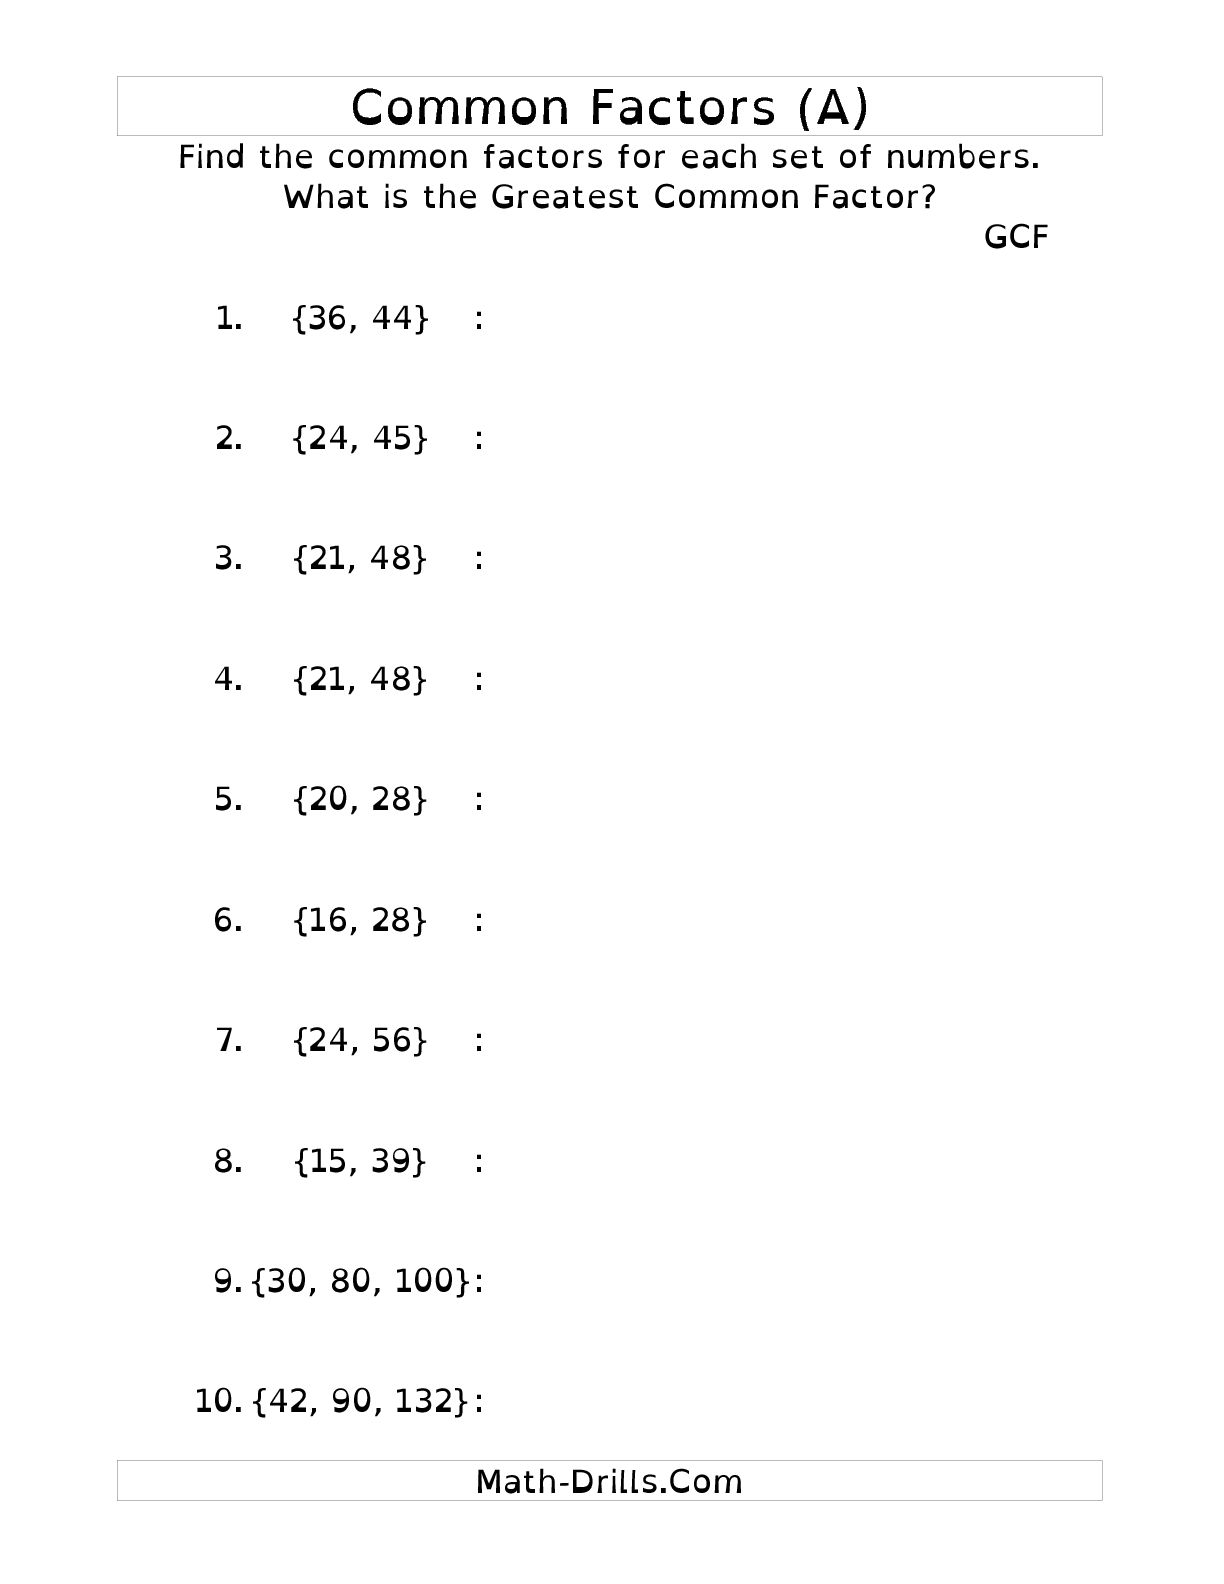 Greatest Common Factor Worksheets Image